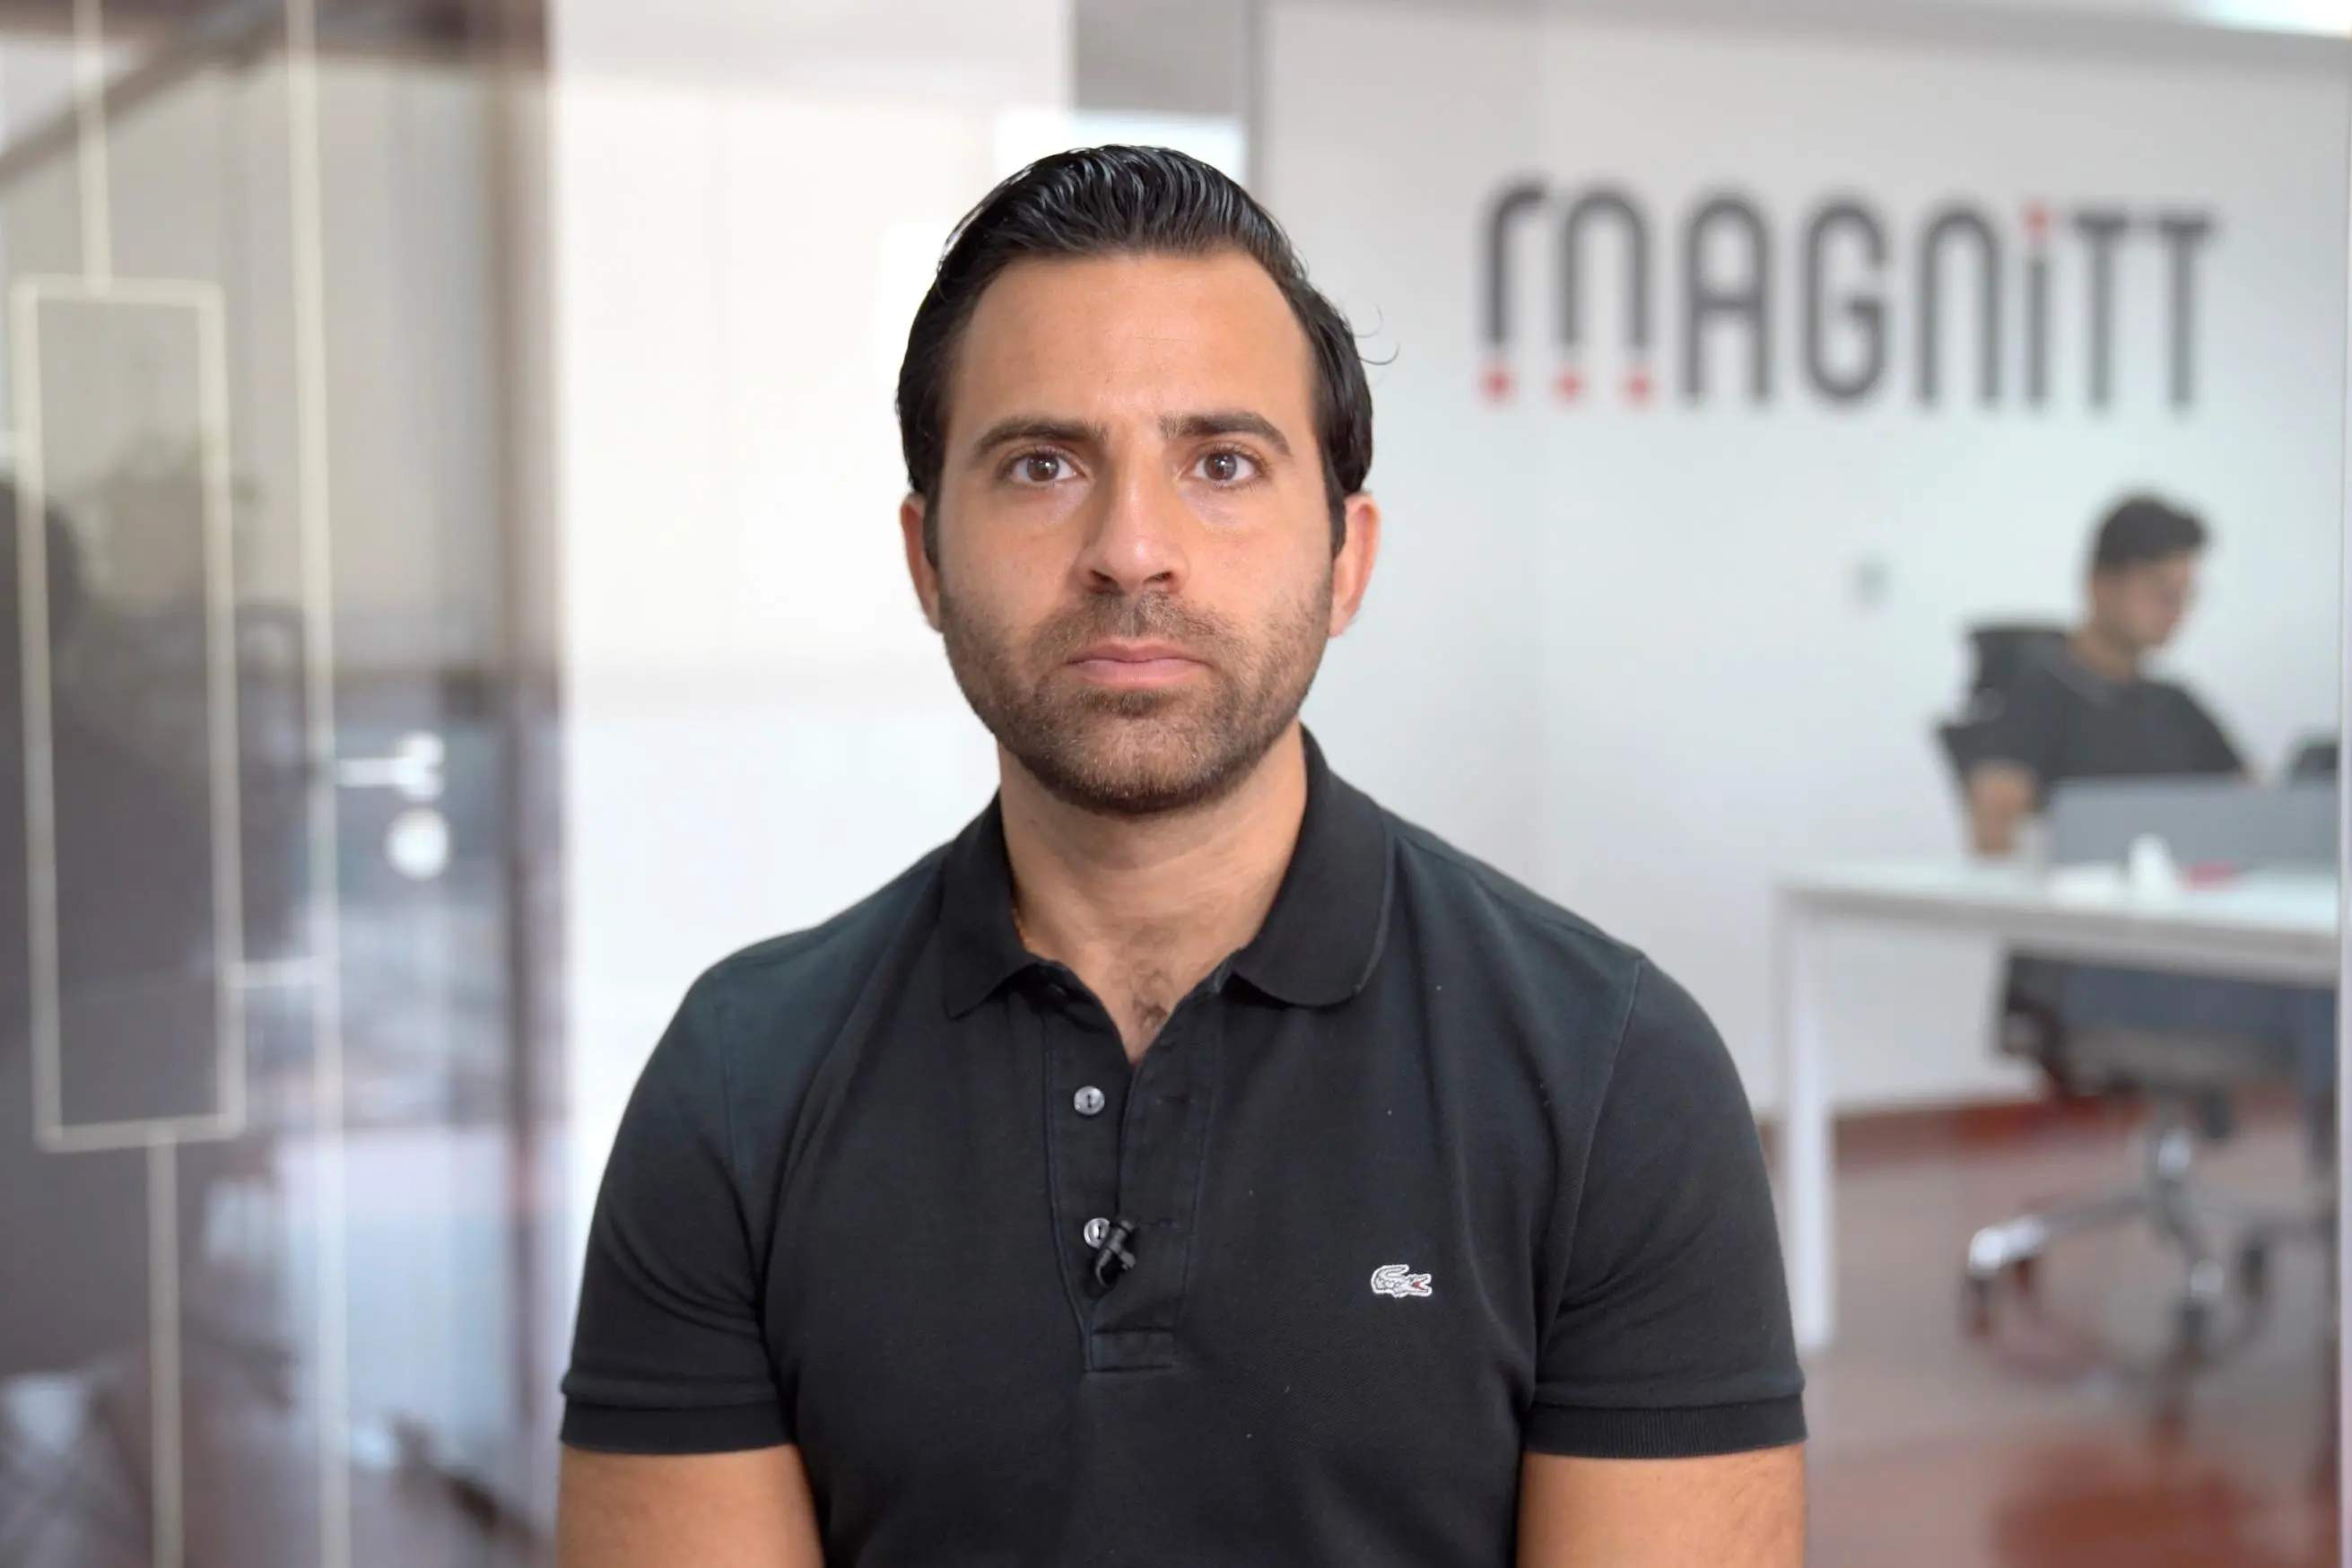 Video: How startups can benefit from Expo 2020 Dubai - Magnitt CEO